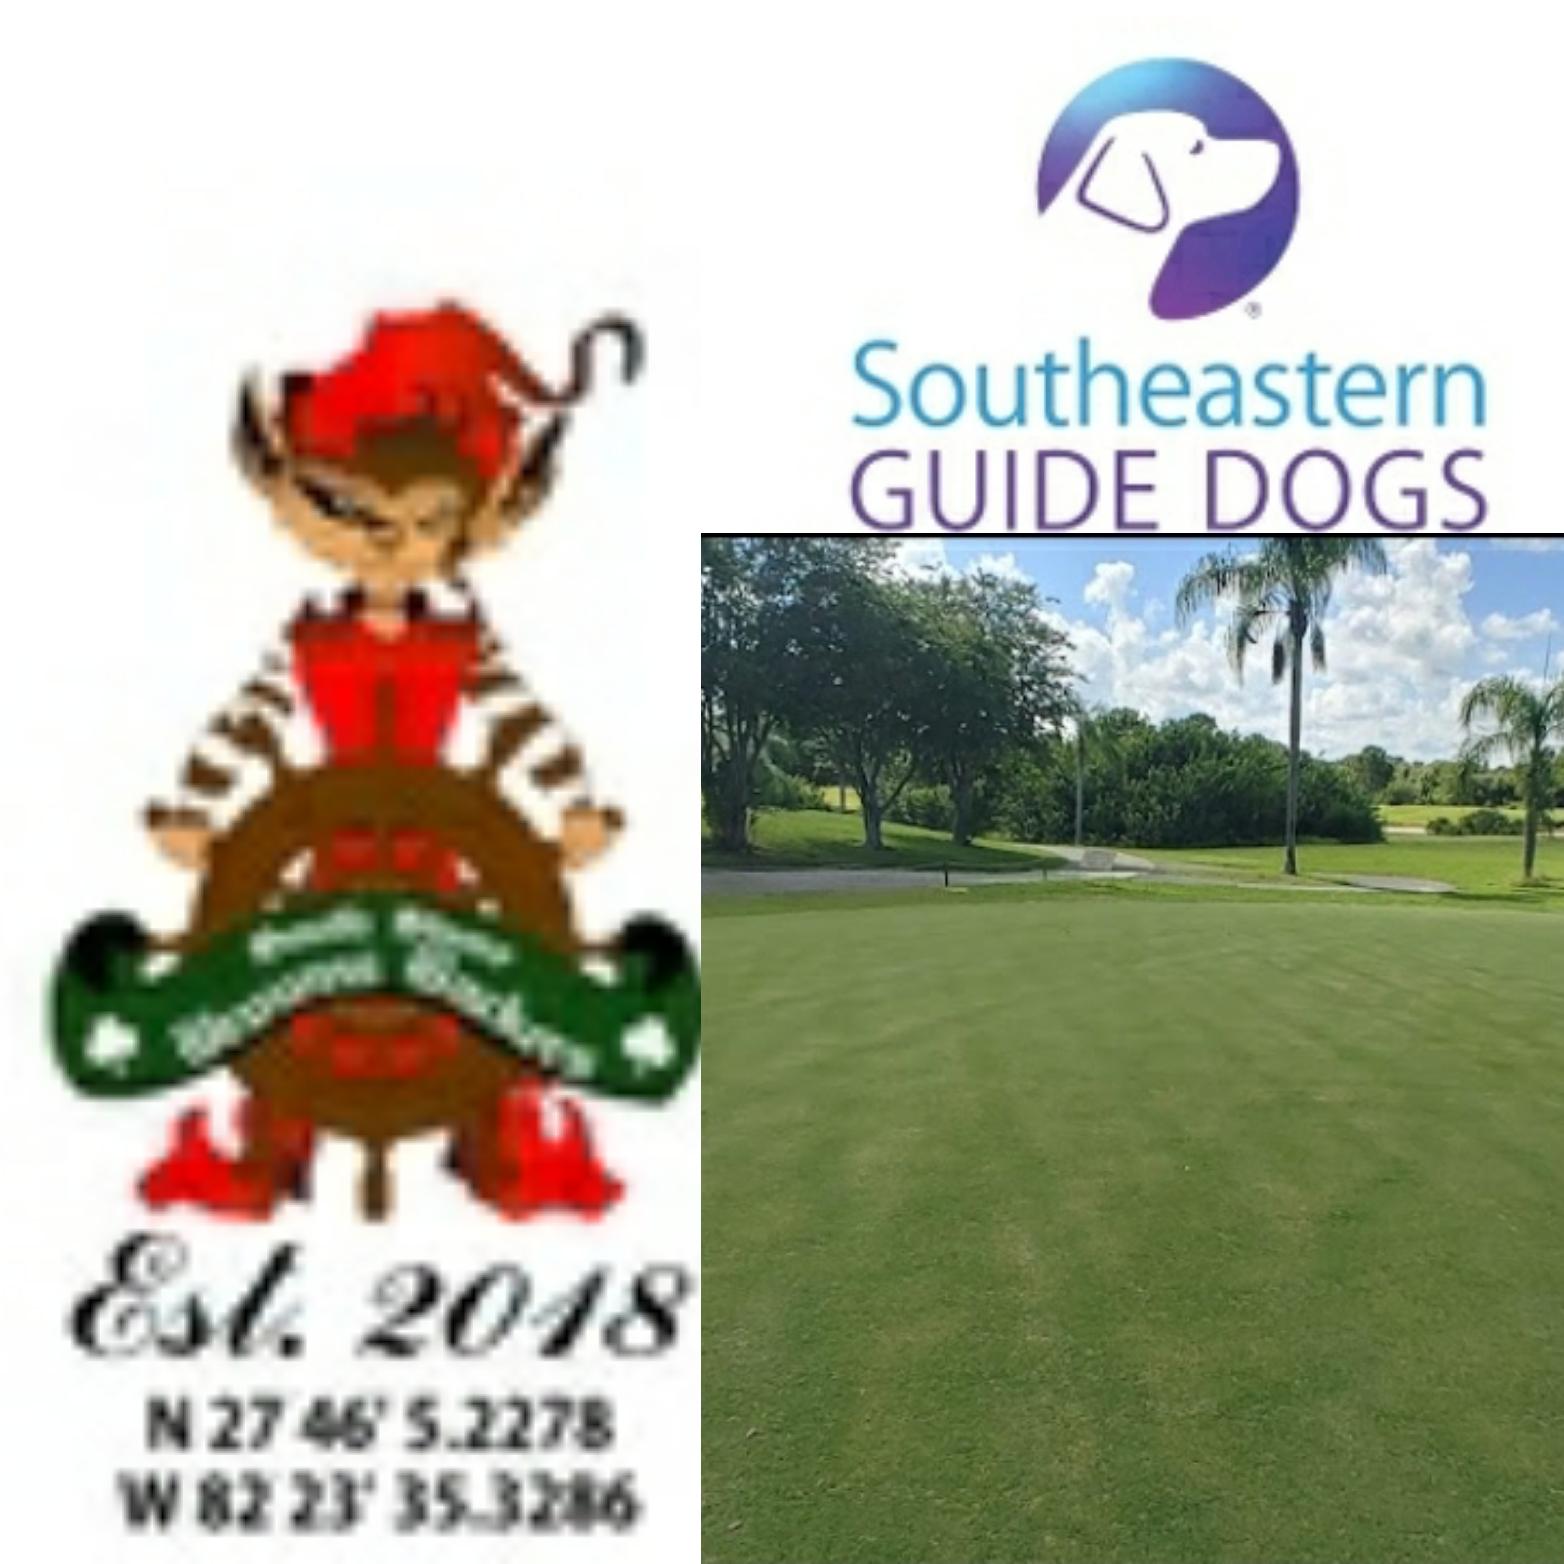 Annual Golf For Guide Dogs Presented by the South Shore Browns Backers